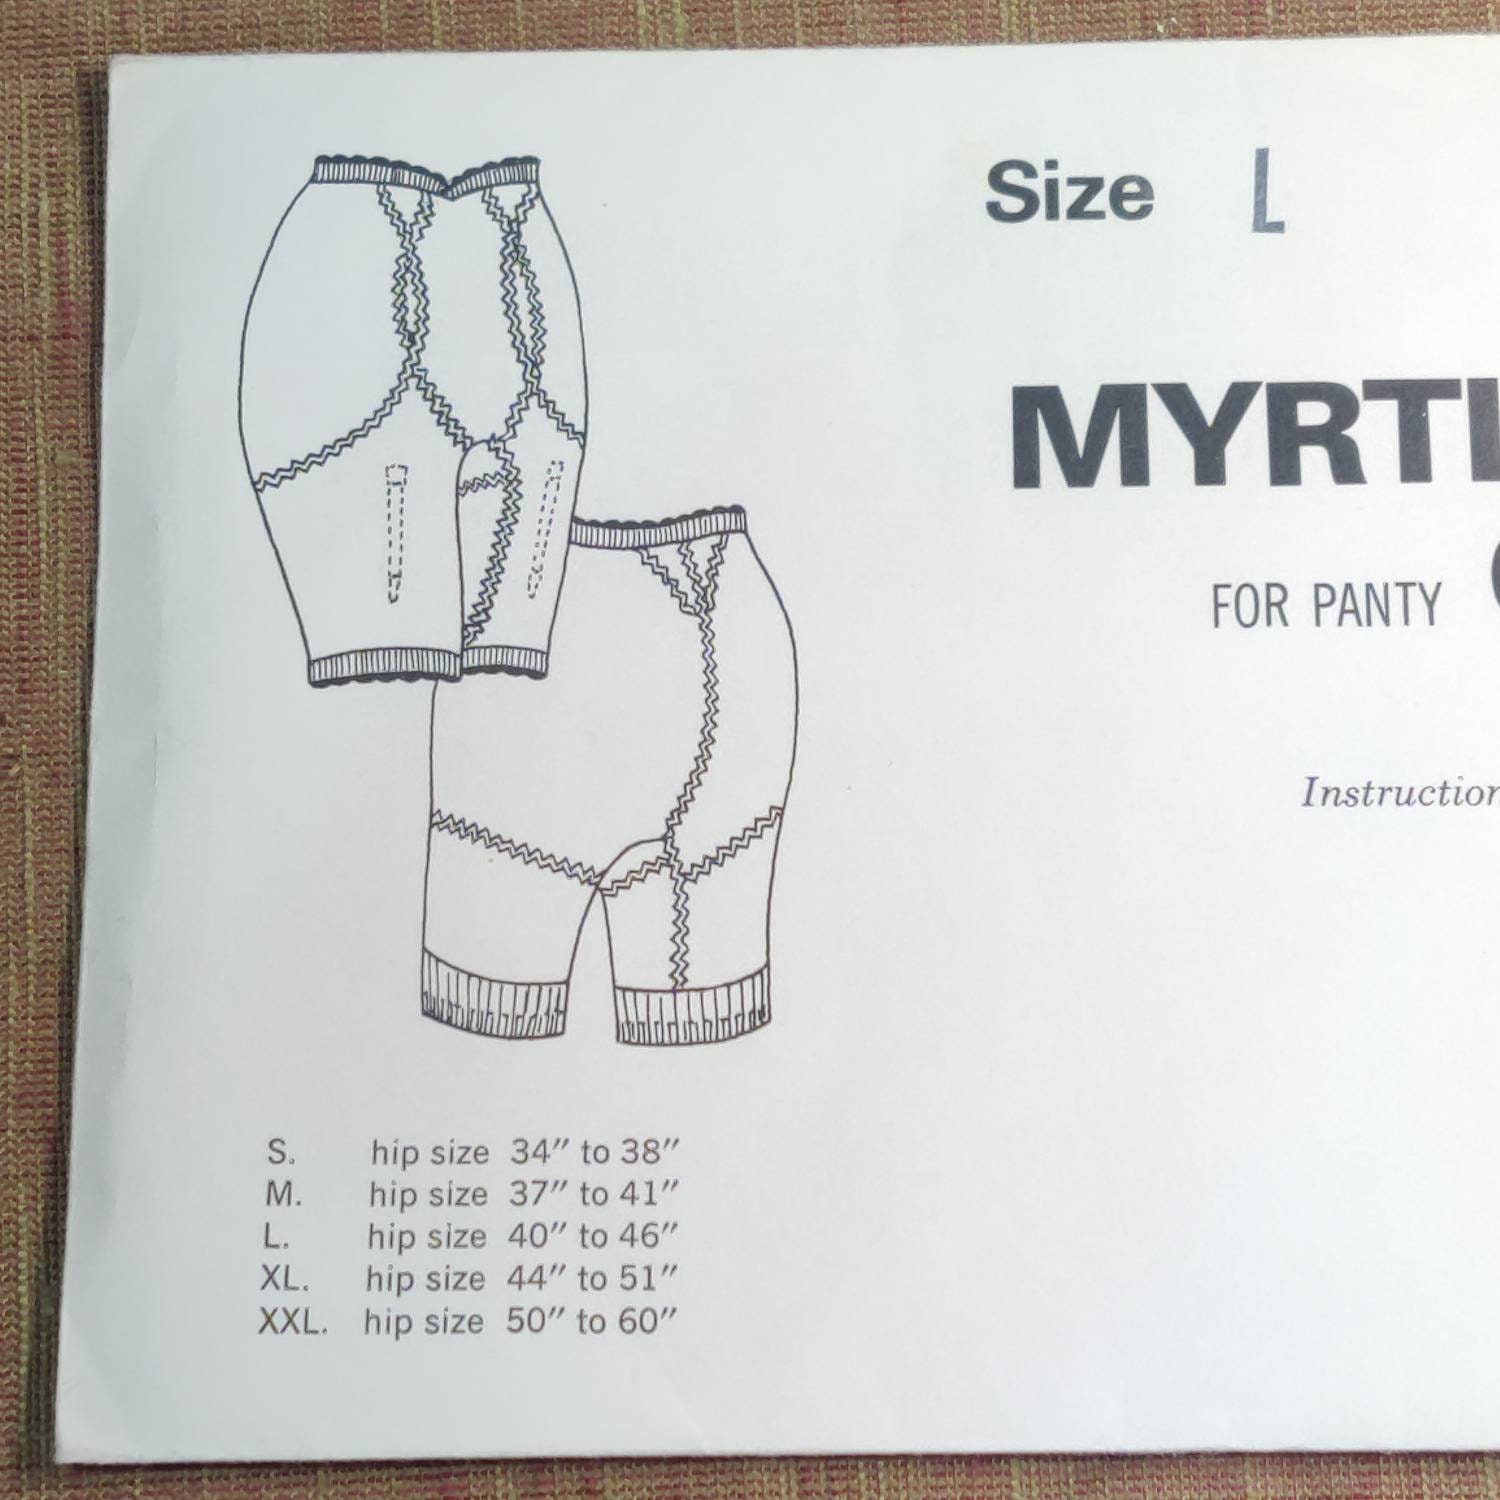 1960s Myrtle's Girdle With Thigh Coverage Under Garments Underwear Lingerie  Vintage Fashion Sewing Pattern 60s Size Large 40-46 Hip UNCUT 